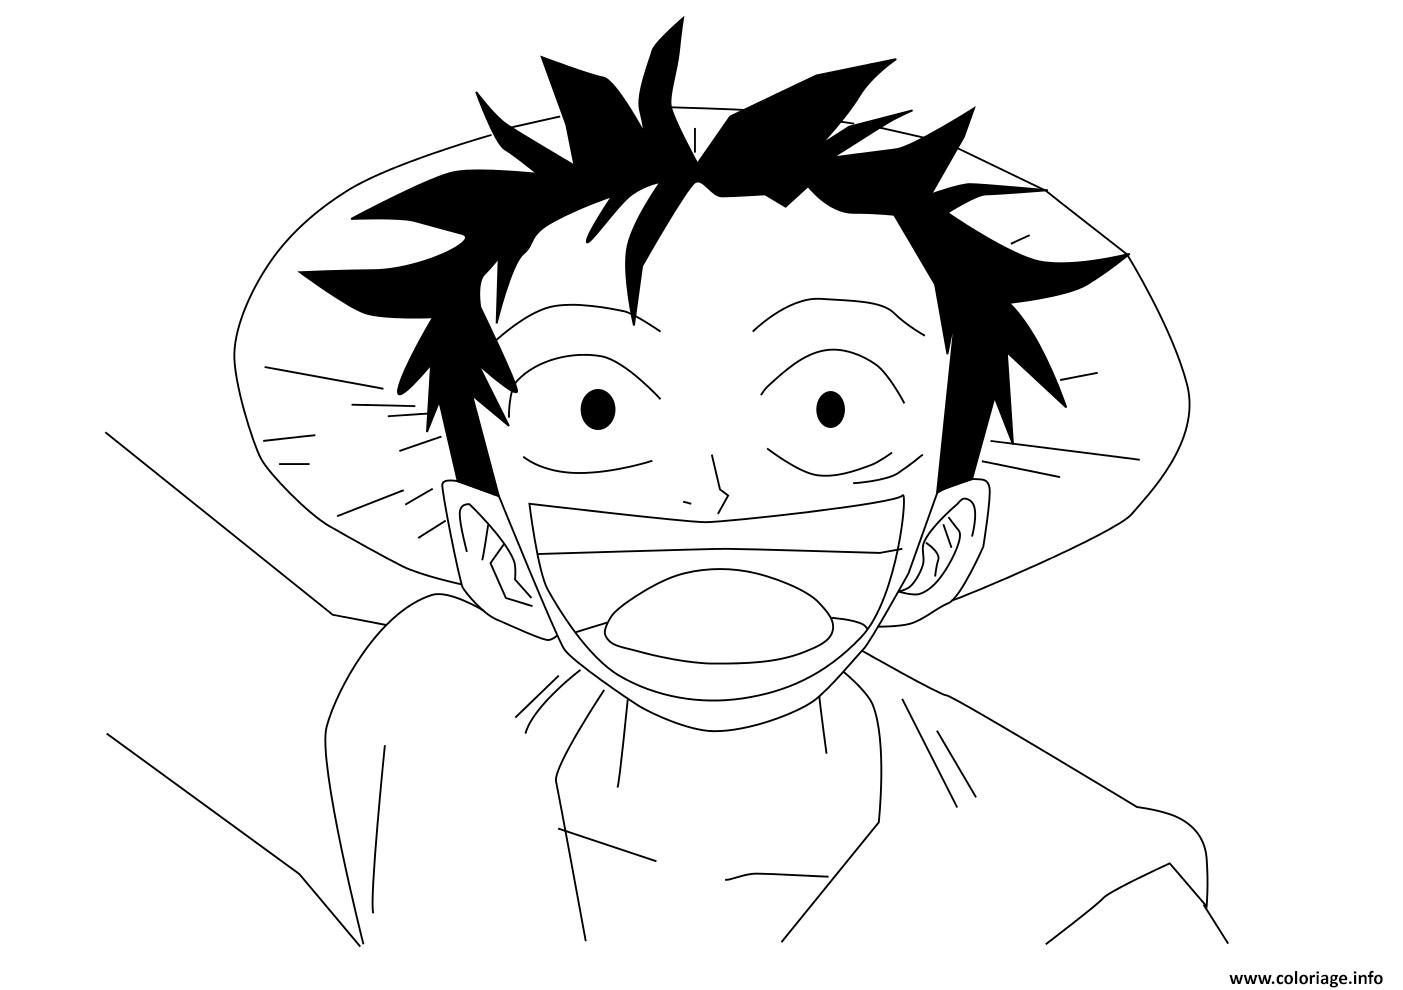 Coloriage One Piece Luffy Trop Heureux Dessin One Piece À Imprimer destiné Coloriage One Piece Personnages 